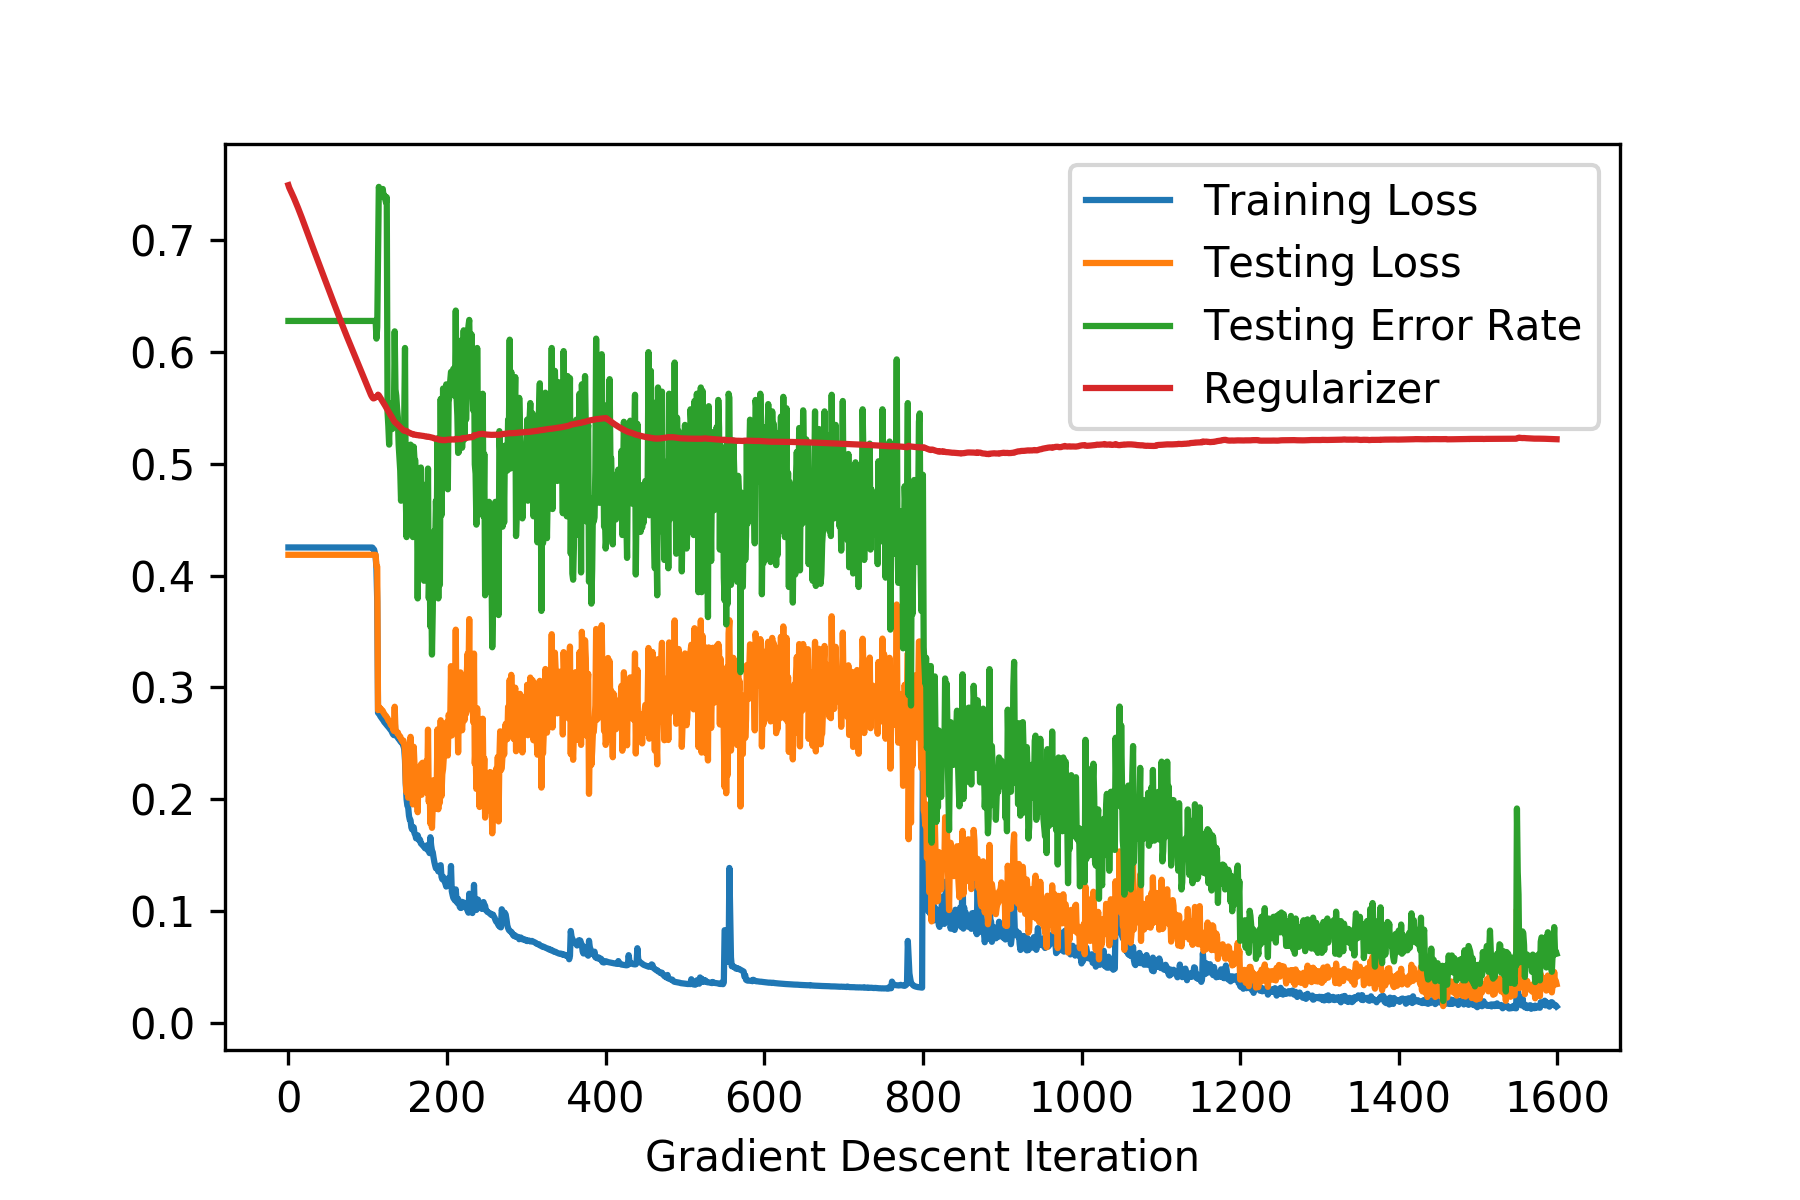 The training and testing history of our neural network. For the first 800 iterations of gradient descent we used the zero initializer for the memory neurons in the RNN layers. While this enabled us to start converging to a minimum for the training loss (blue), we see that we were still performing terribly on the testing dataset (orange and green). After the 800th iteration we switched to a random initializer which made our neural network converge to a much more robust state that enabled it to generalize well to previously unseen data.